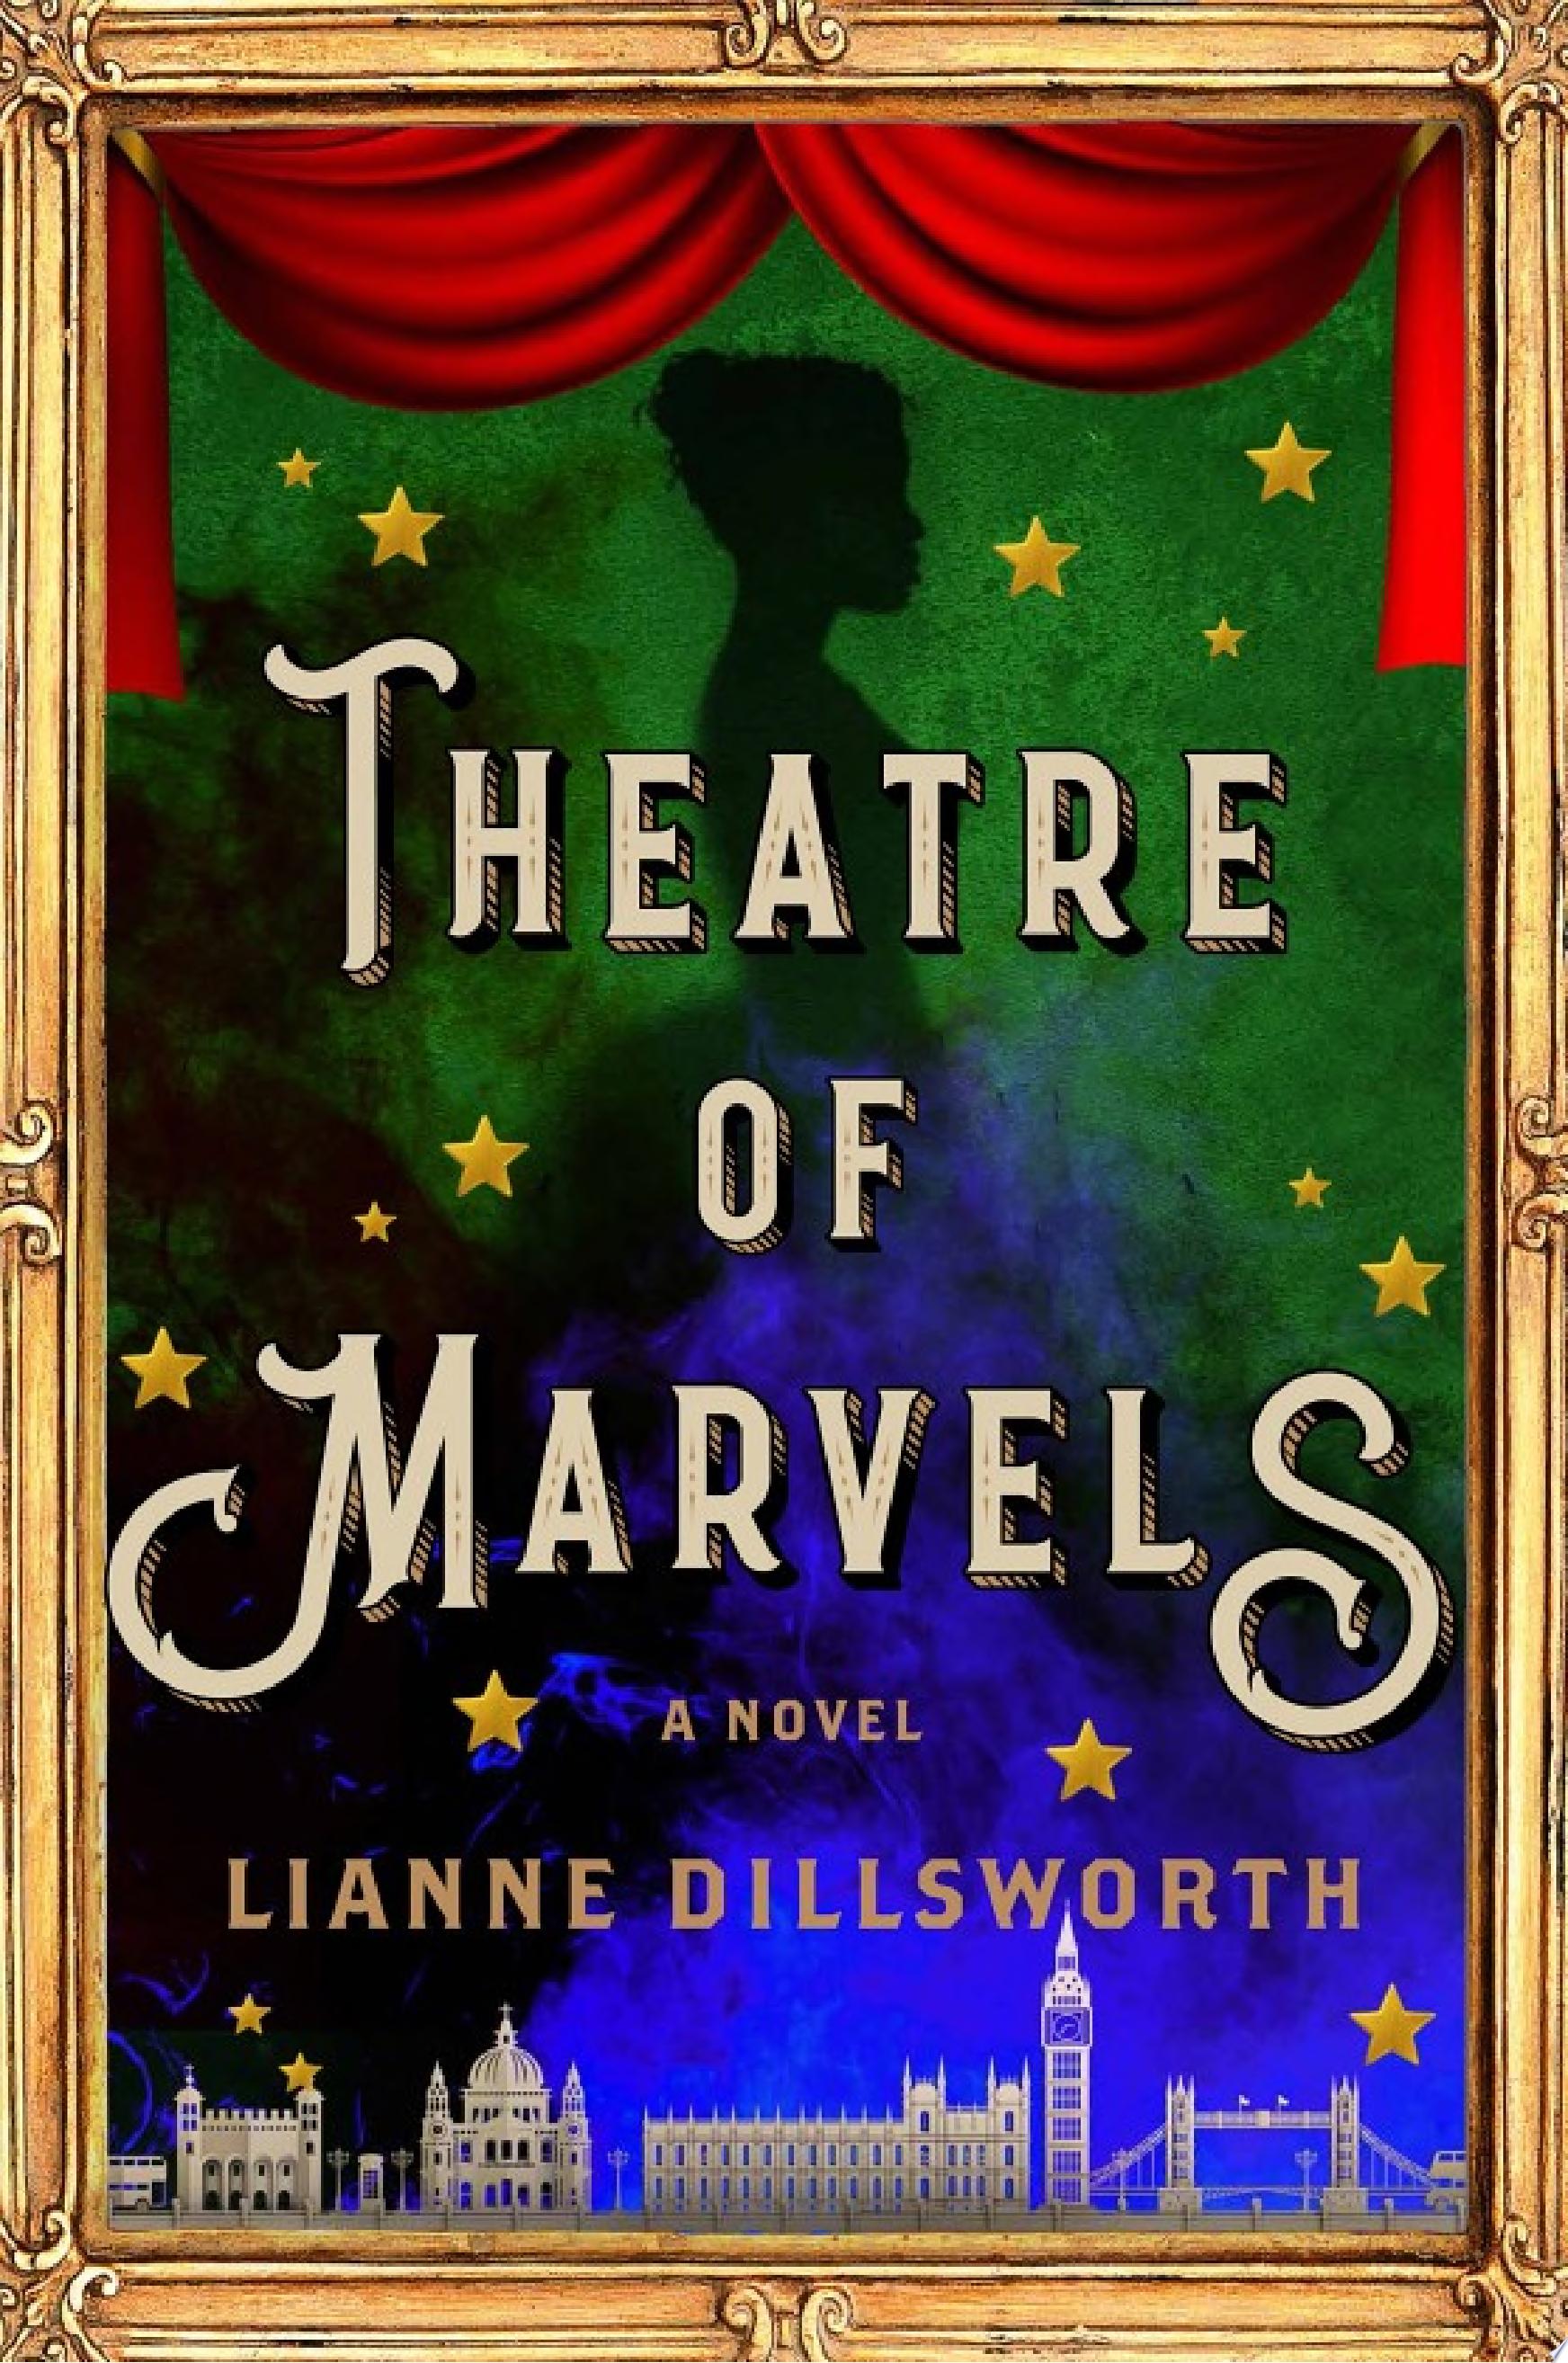 Image for "Theatre of Marvels"